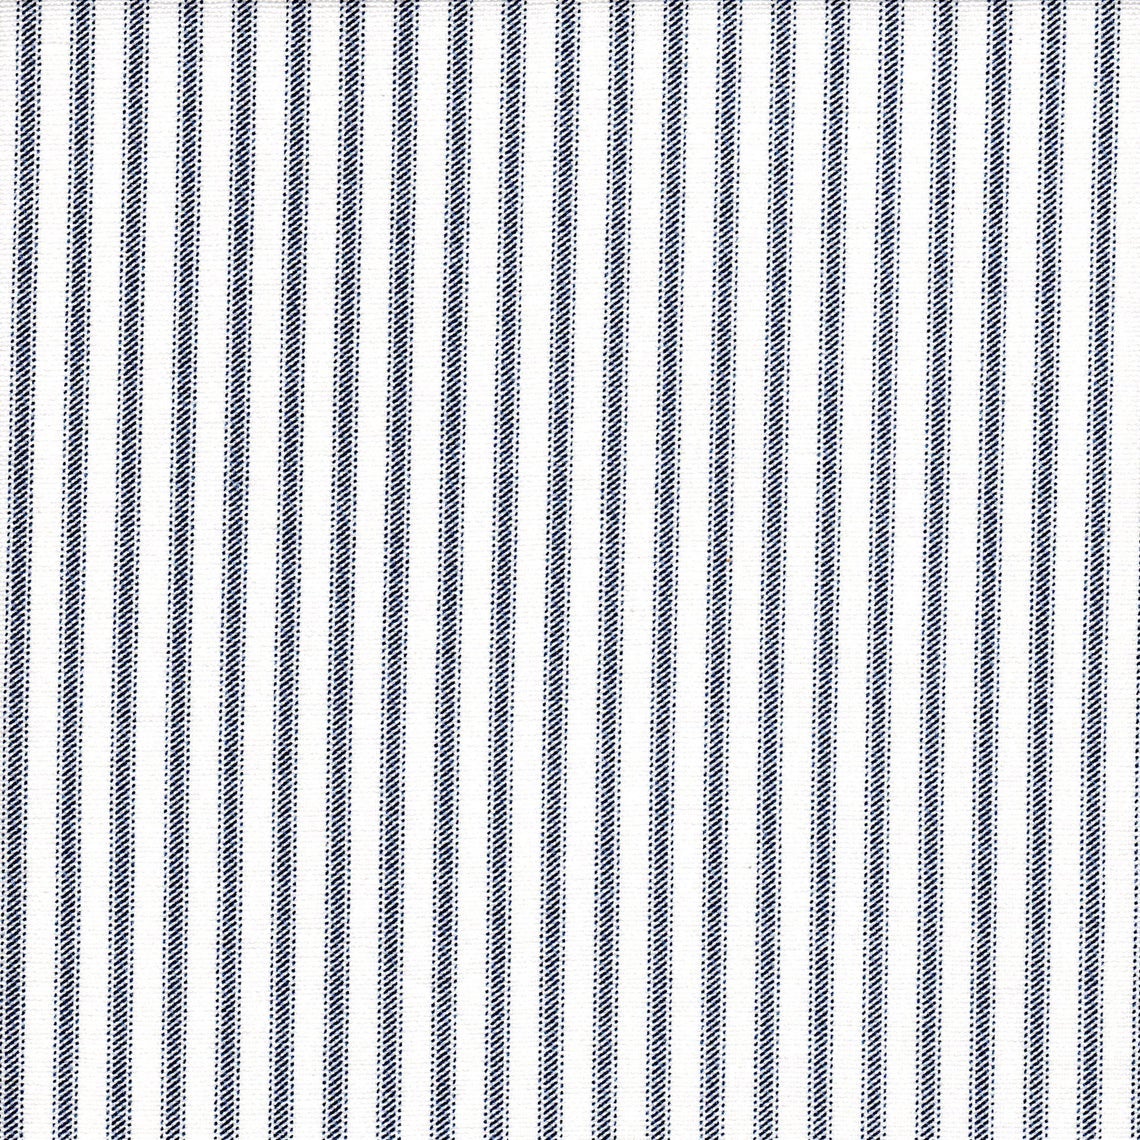 bed scarf in classic navy blue ticking stripe on white